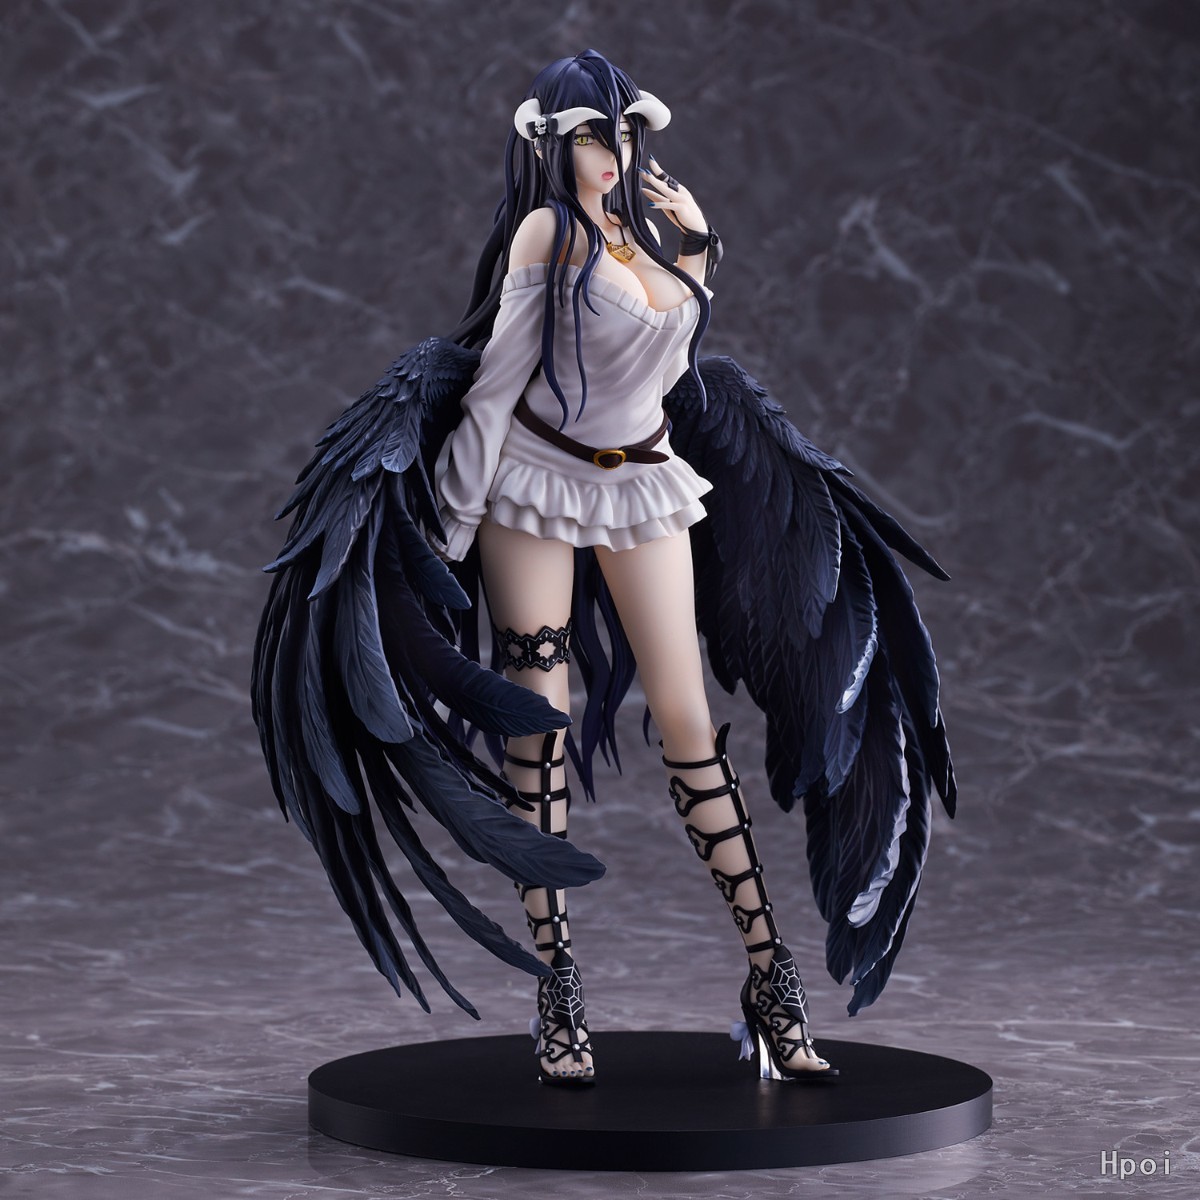 

Japanese Anime UnionCreative OVERLORD III albedo PVC Action Figure Toy Game Statue Anime figure Collectible Model Doll Gift X0522, This is only one opp bag